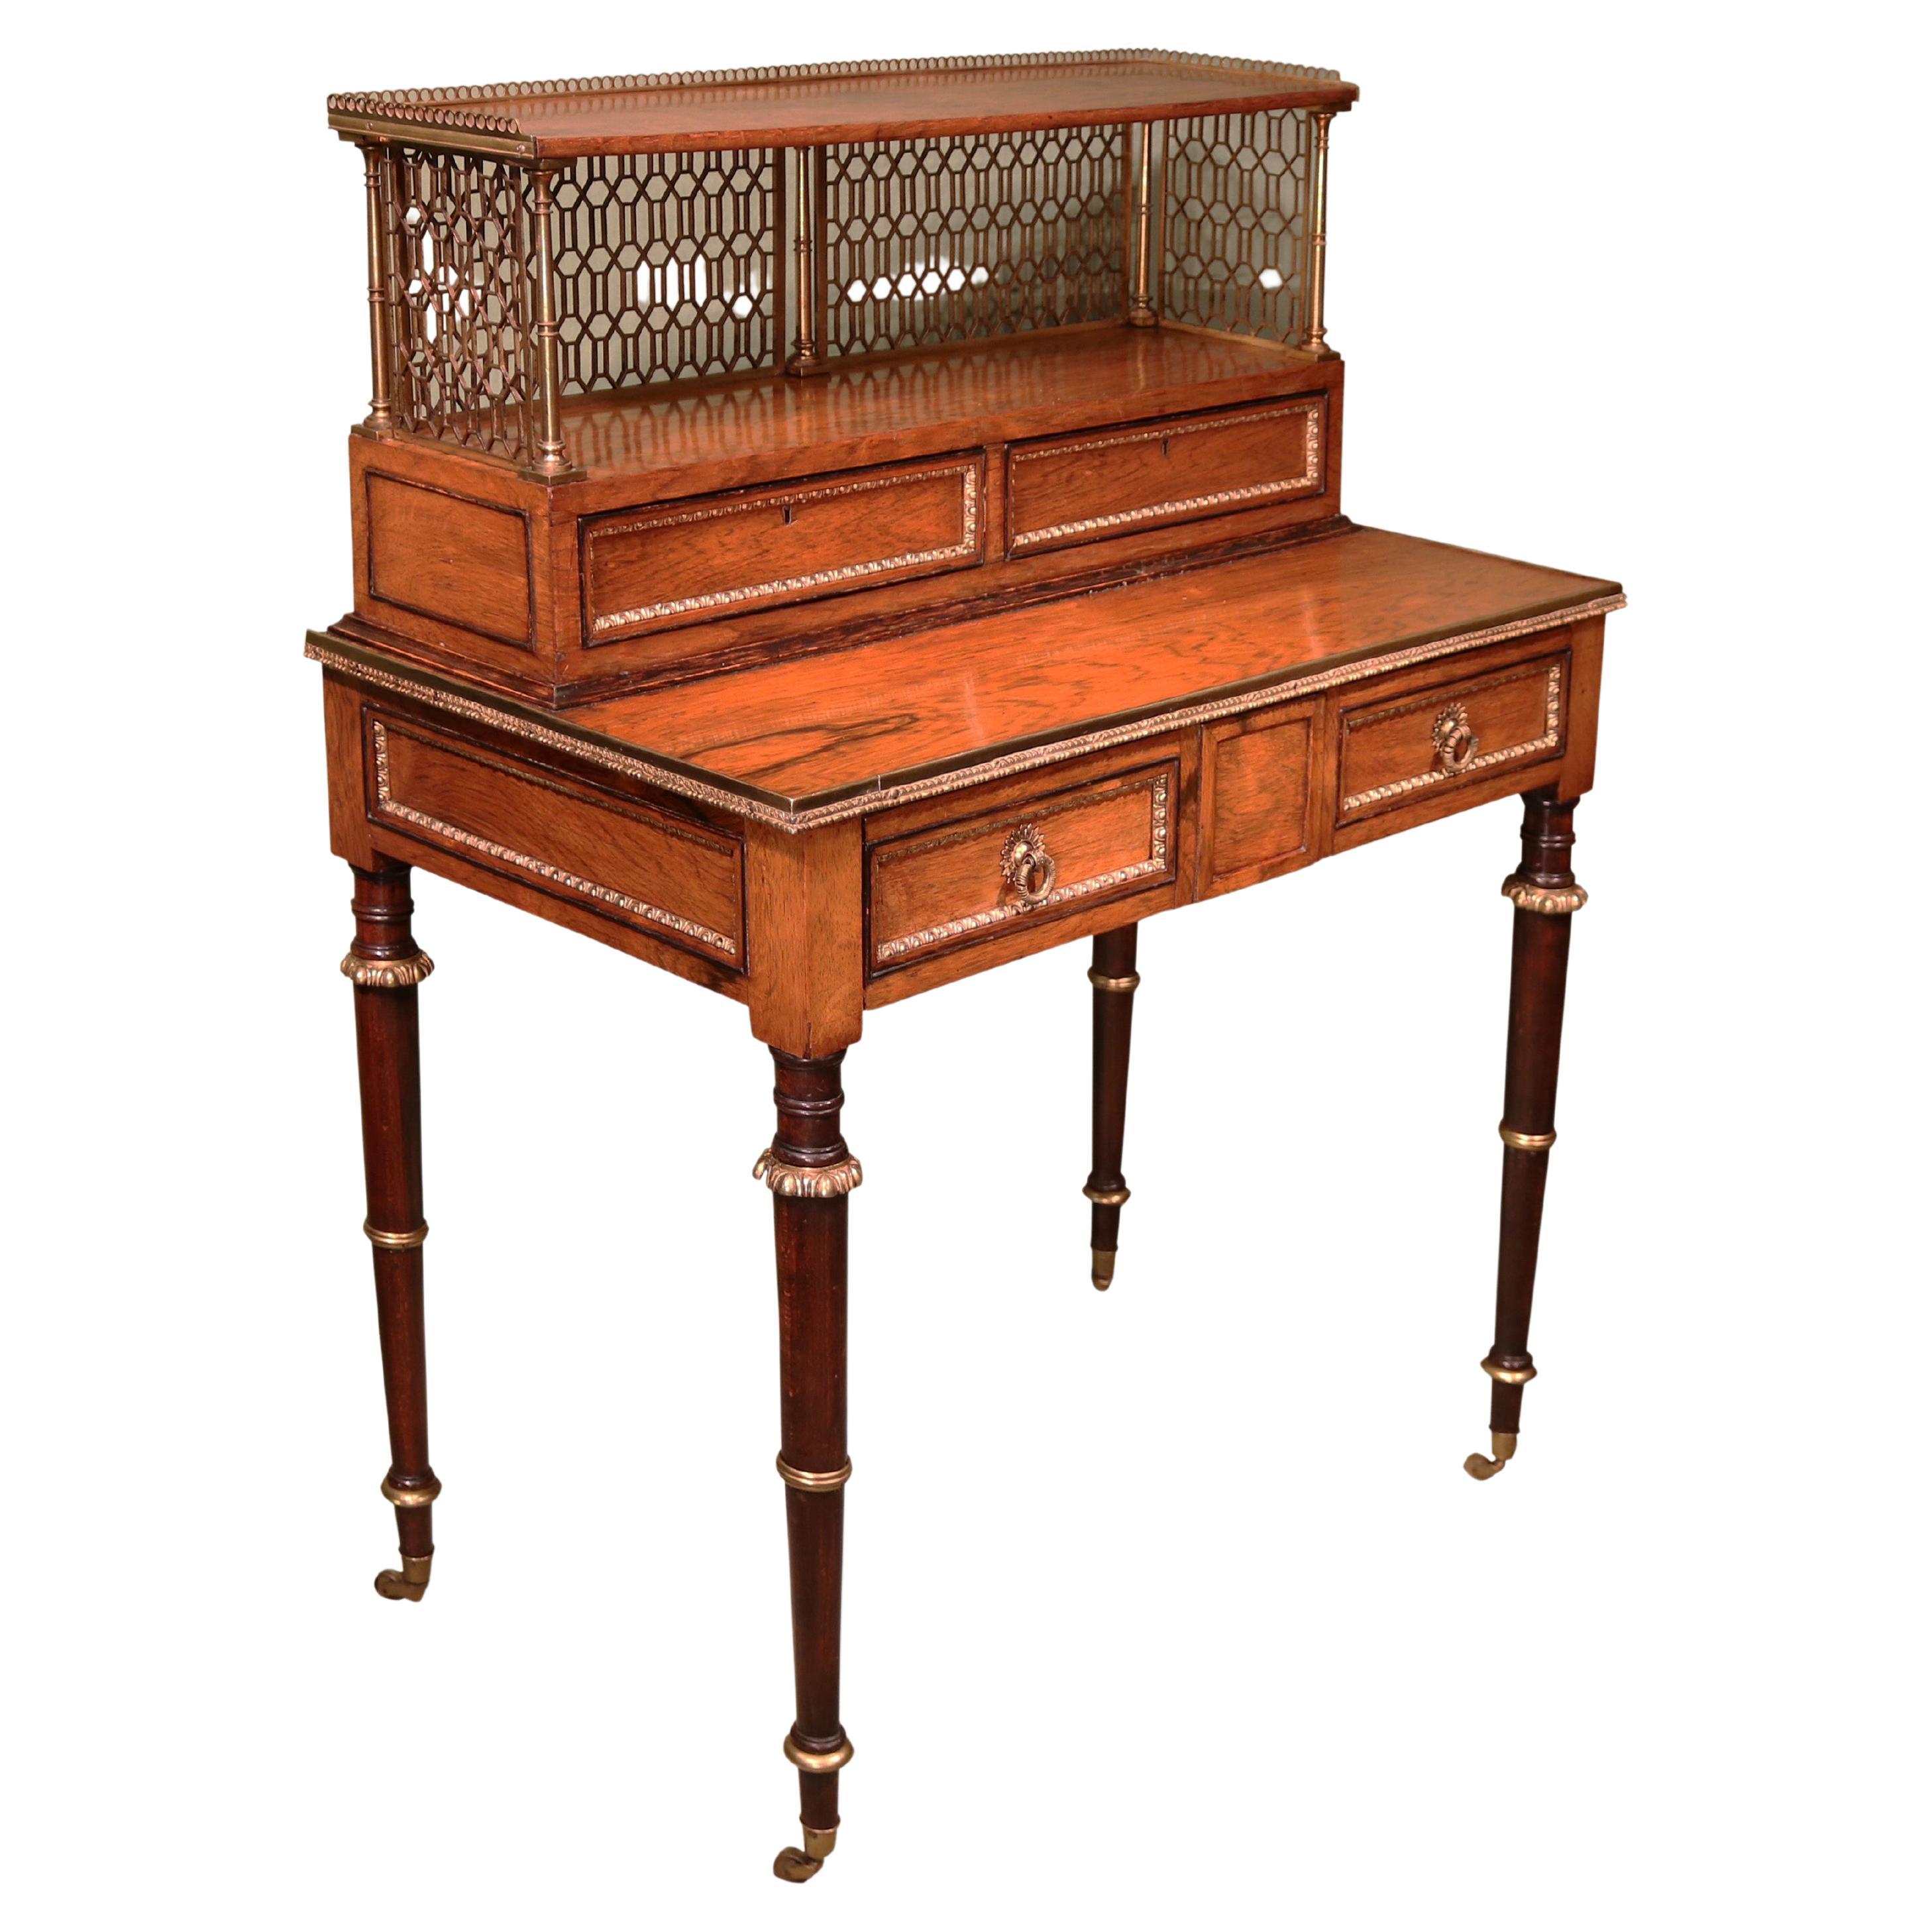 Antique Early 19th Century Rosewood Bonheur Du Jour in the Style of John Mclean